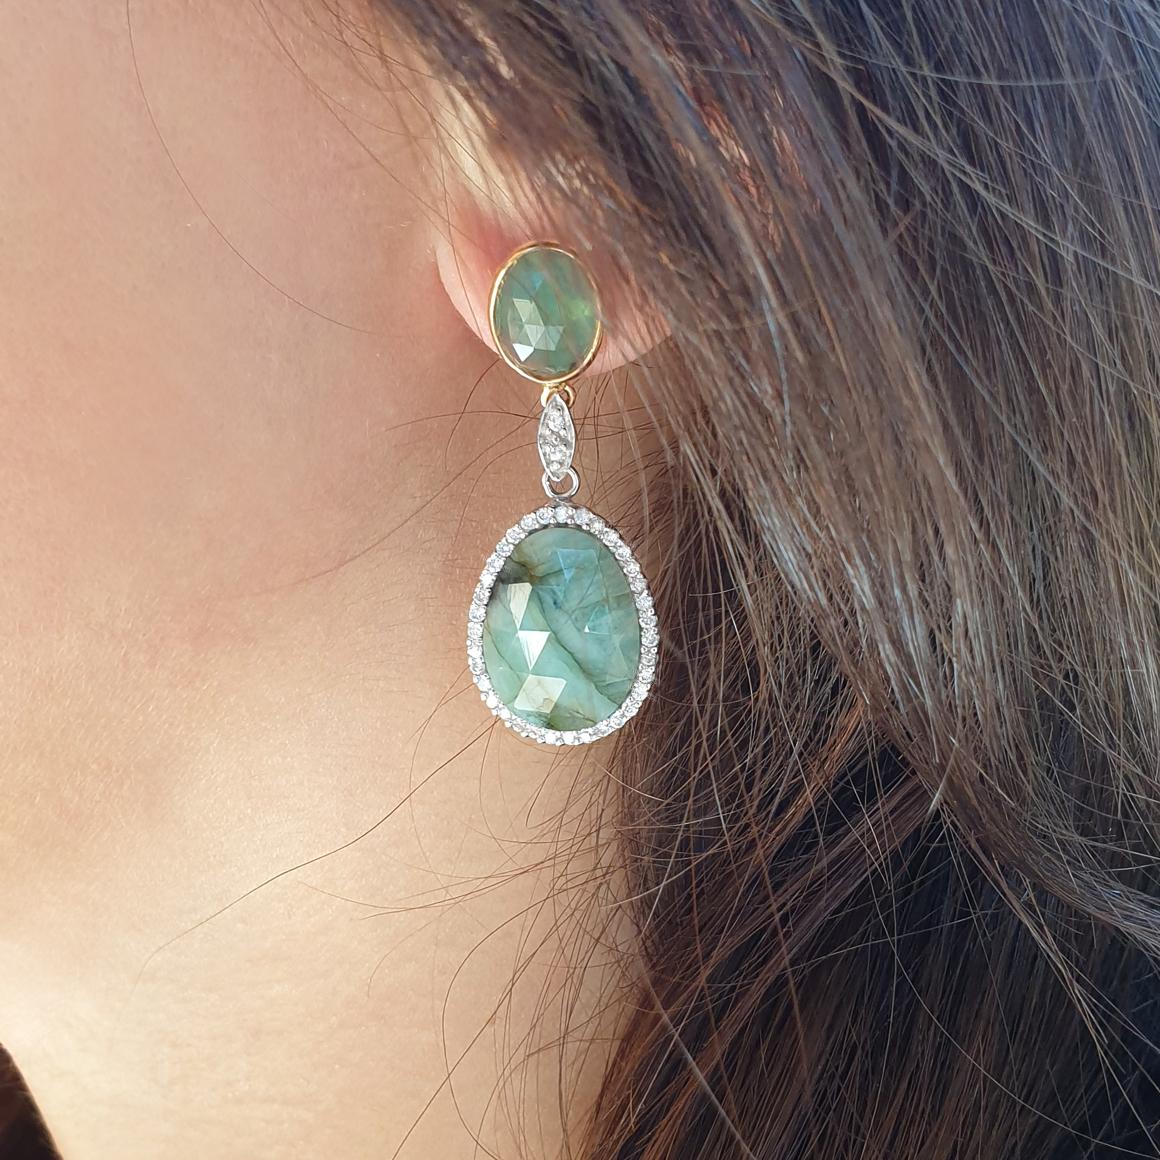 Emeralds are known to be calming and balancing, promoting creativity and eloquence and restoring faith and hope. The are believed to bring good fortune and are used to kindle kindness and sympathy. This Earrings are maked with unique stones of